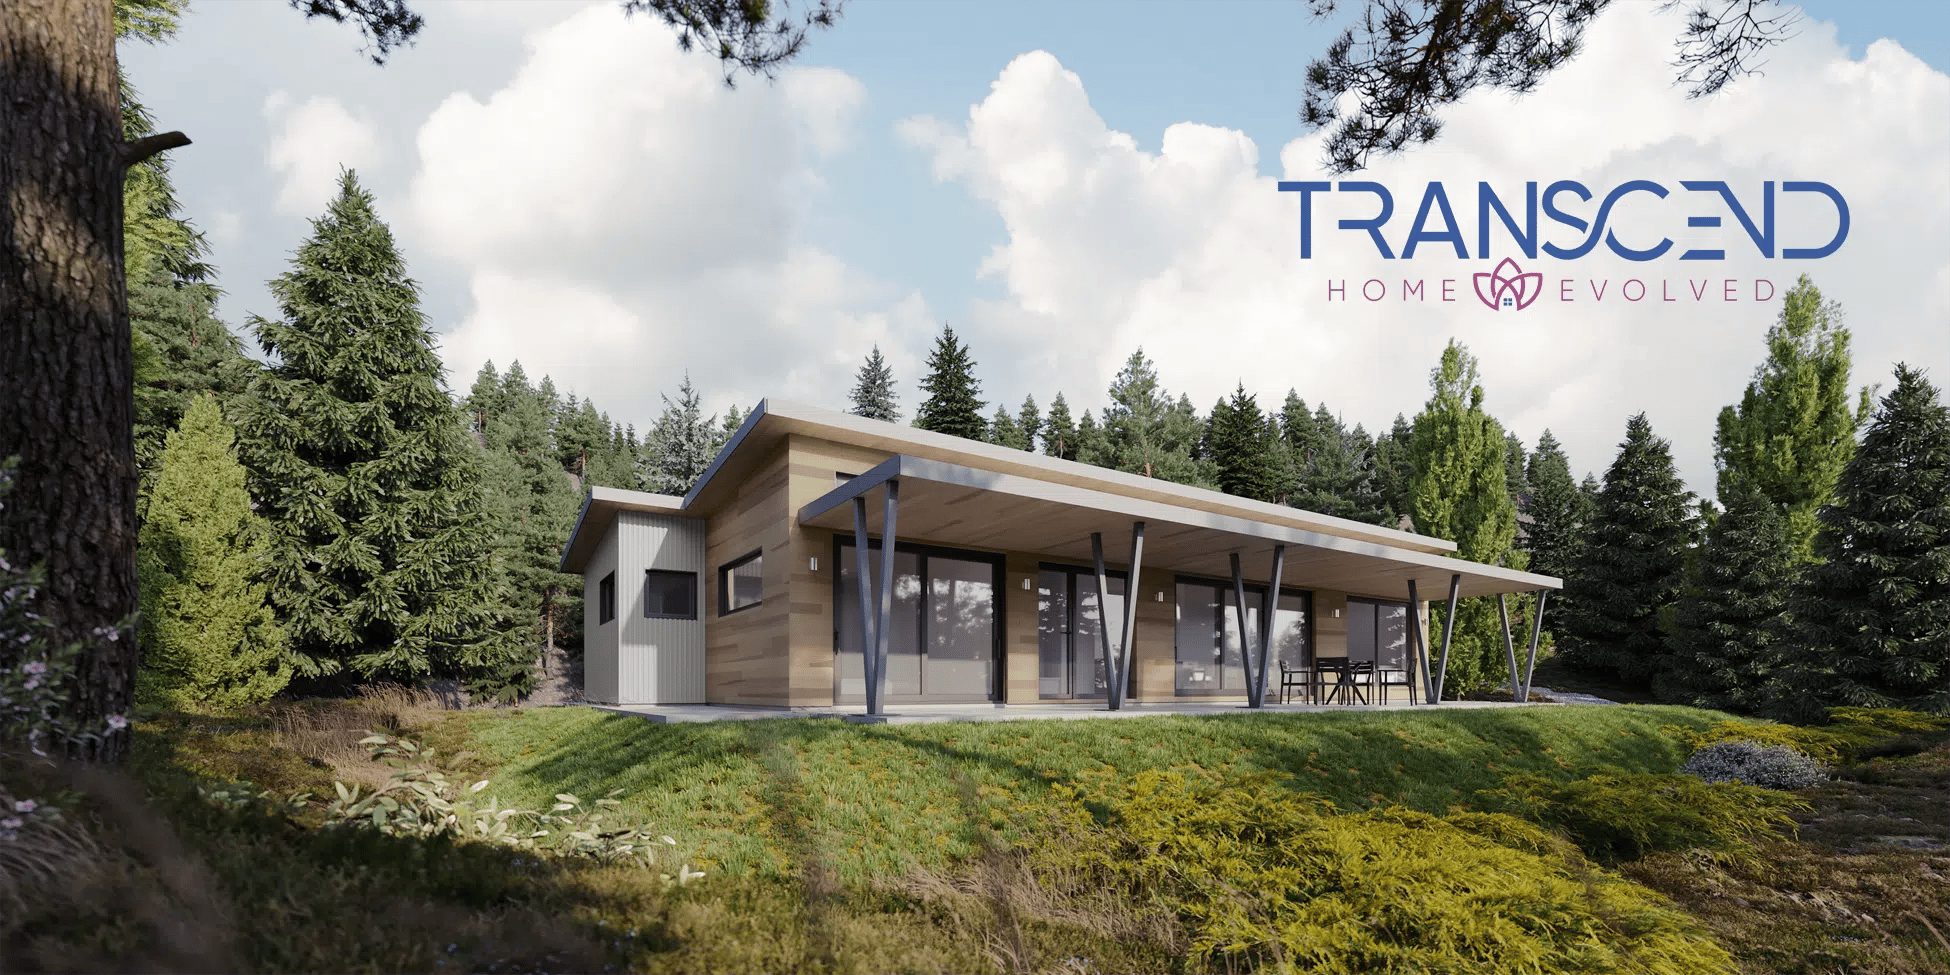 Transcend_demo_home_rendering with logo